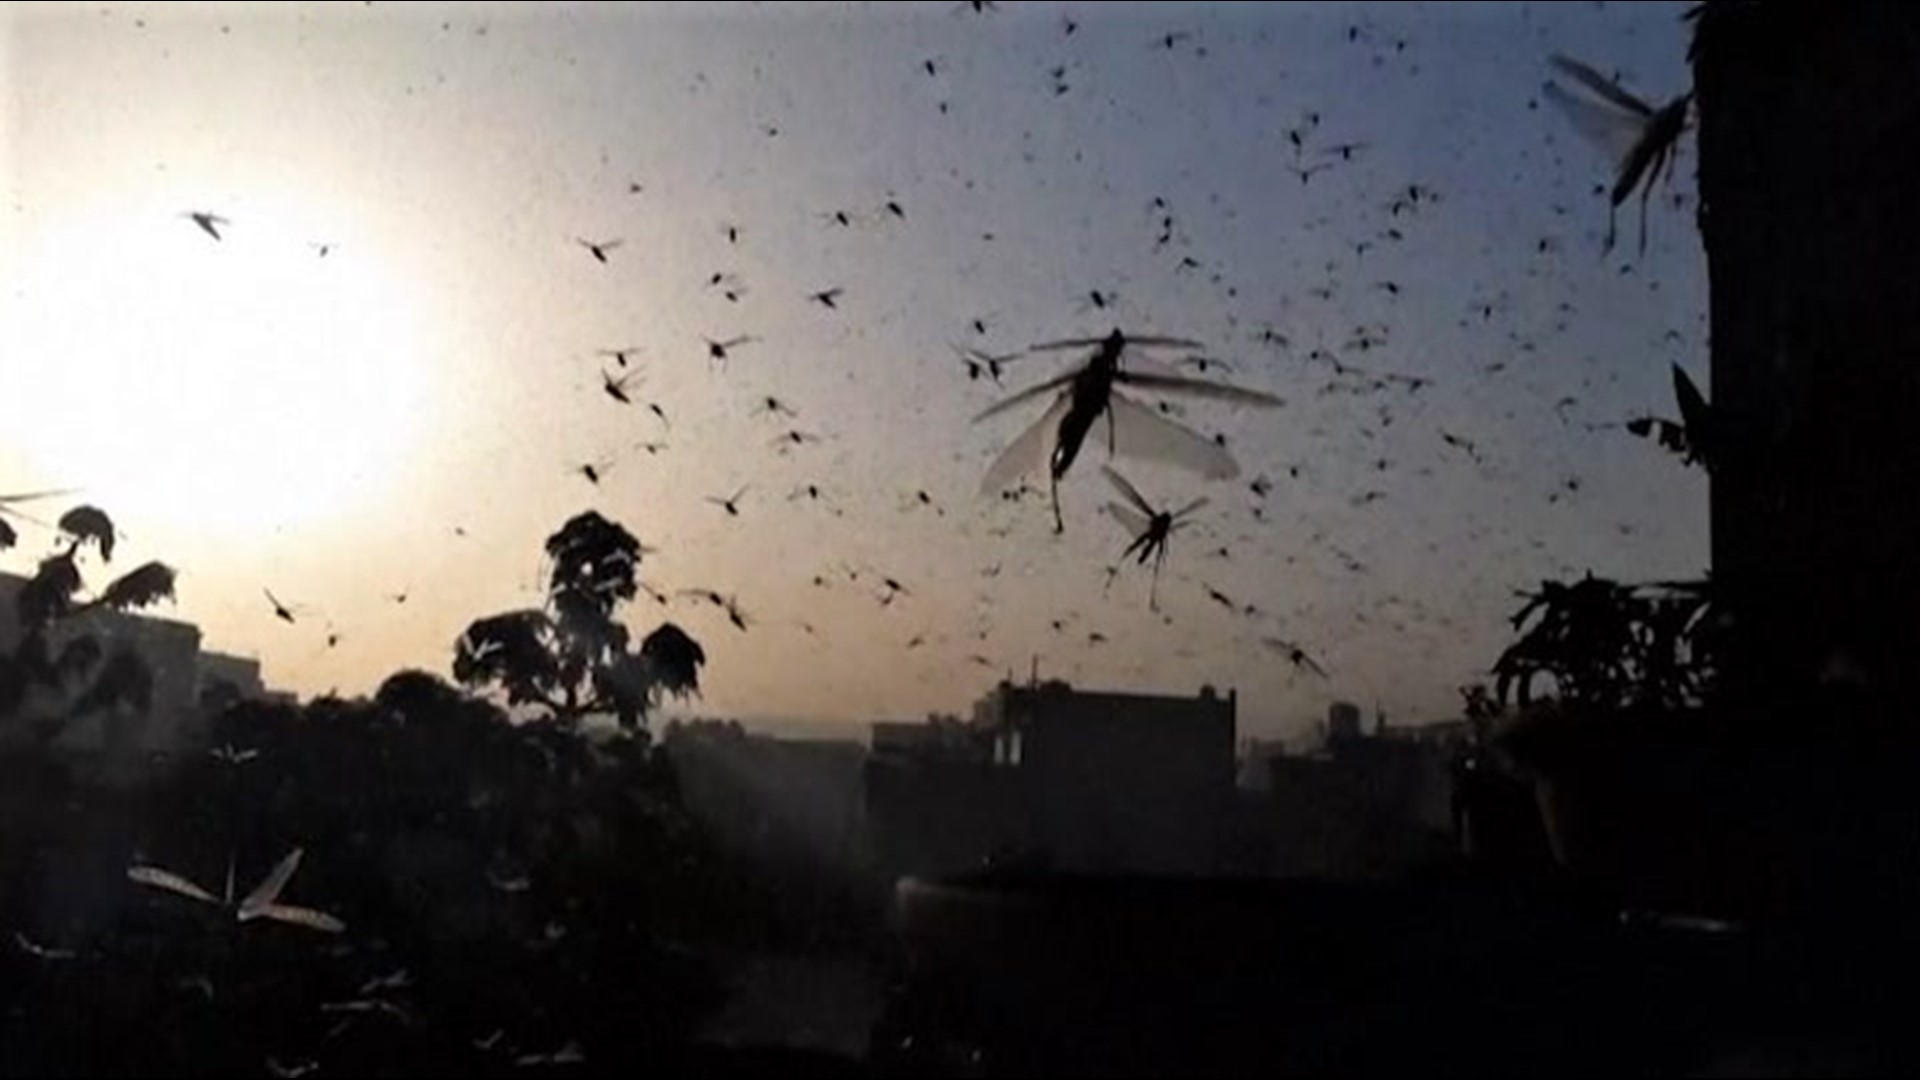 The worst locust plague in decades hit Jaipur, India, on May 25, after heavy rains and cyclones rapidly increased locust population growth in 2019.